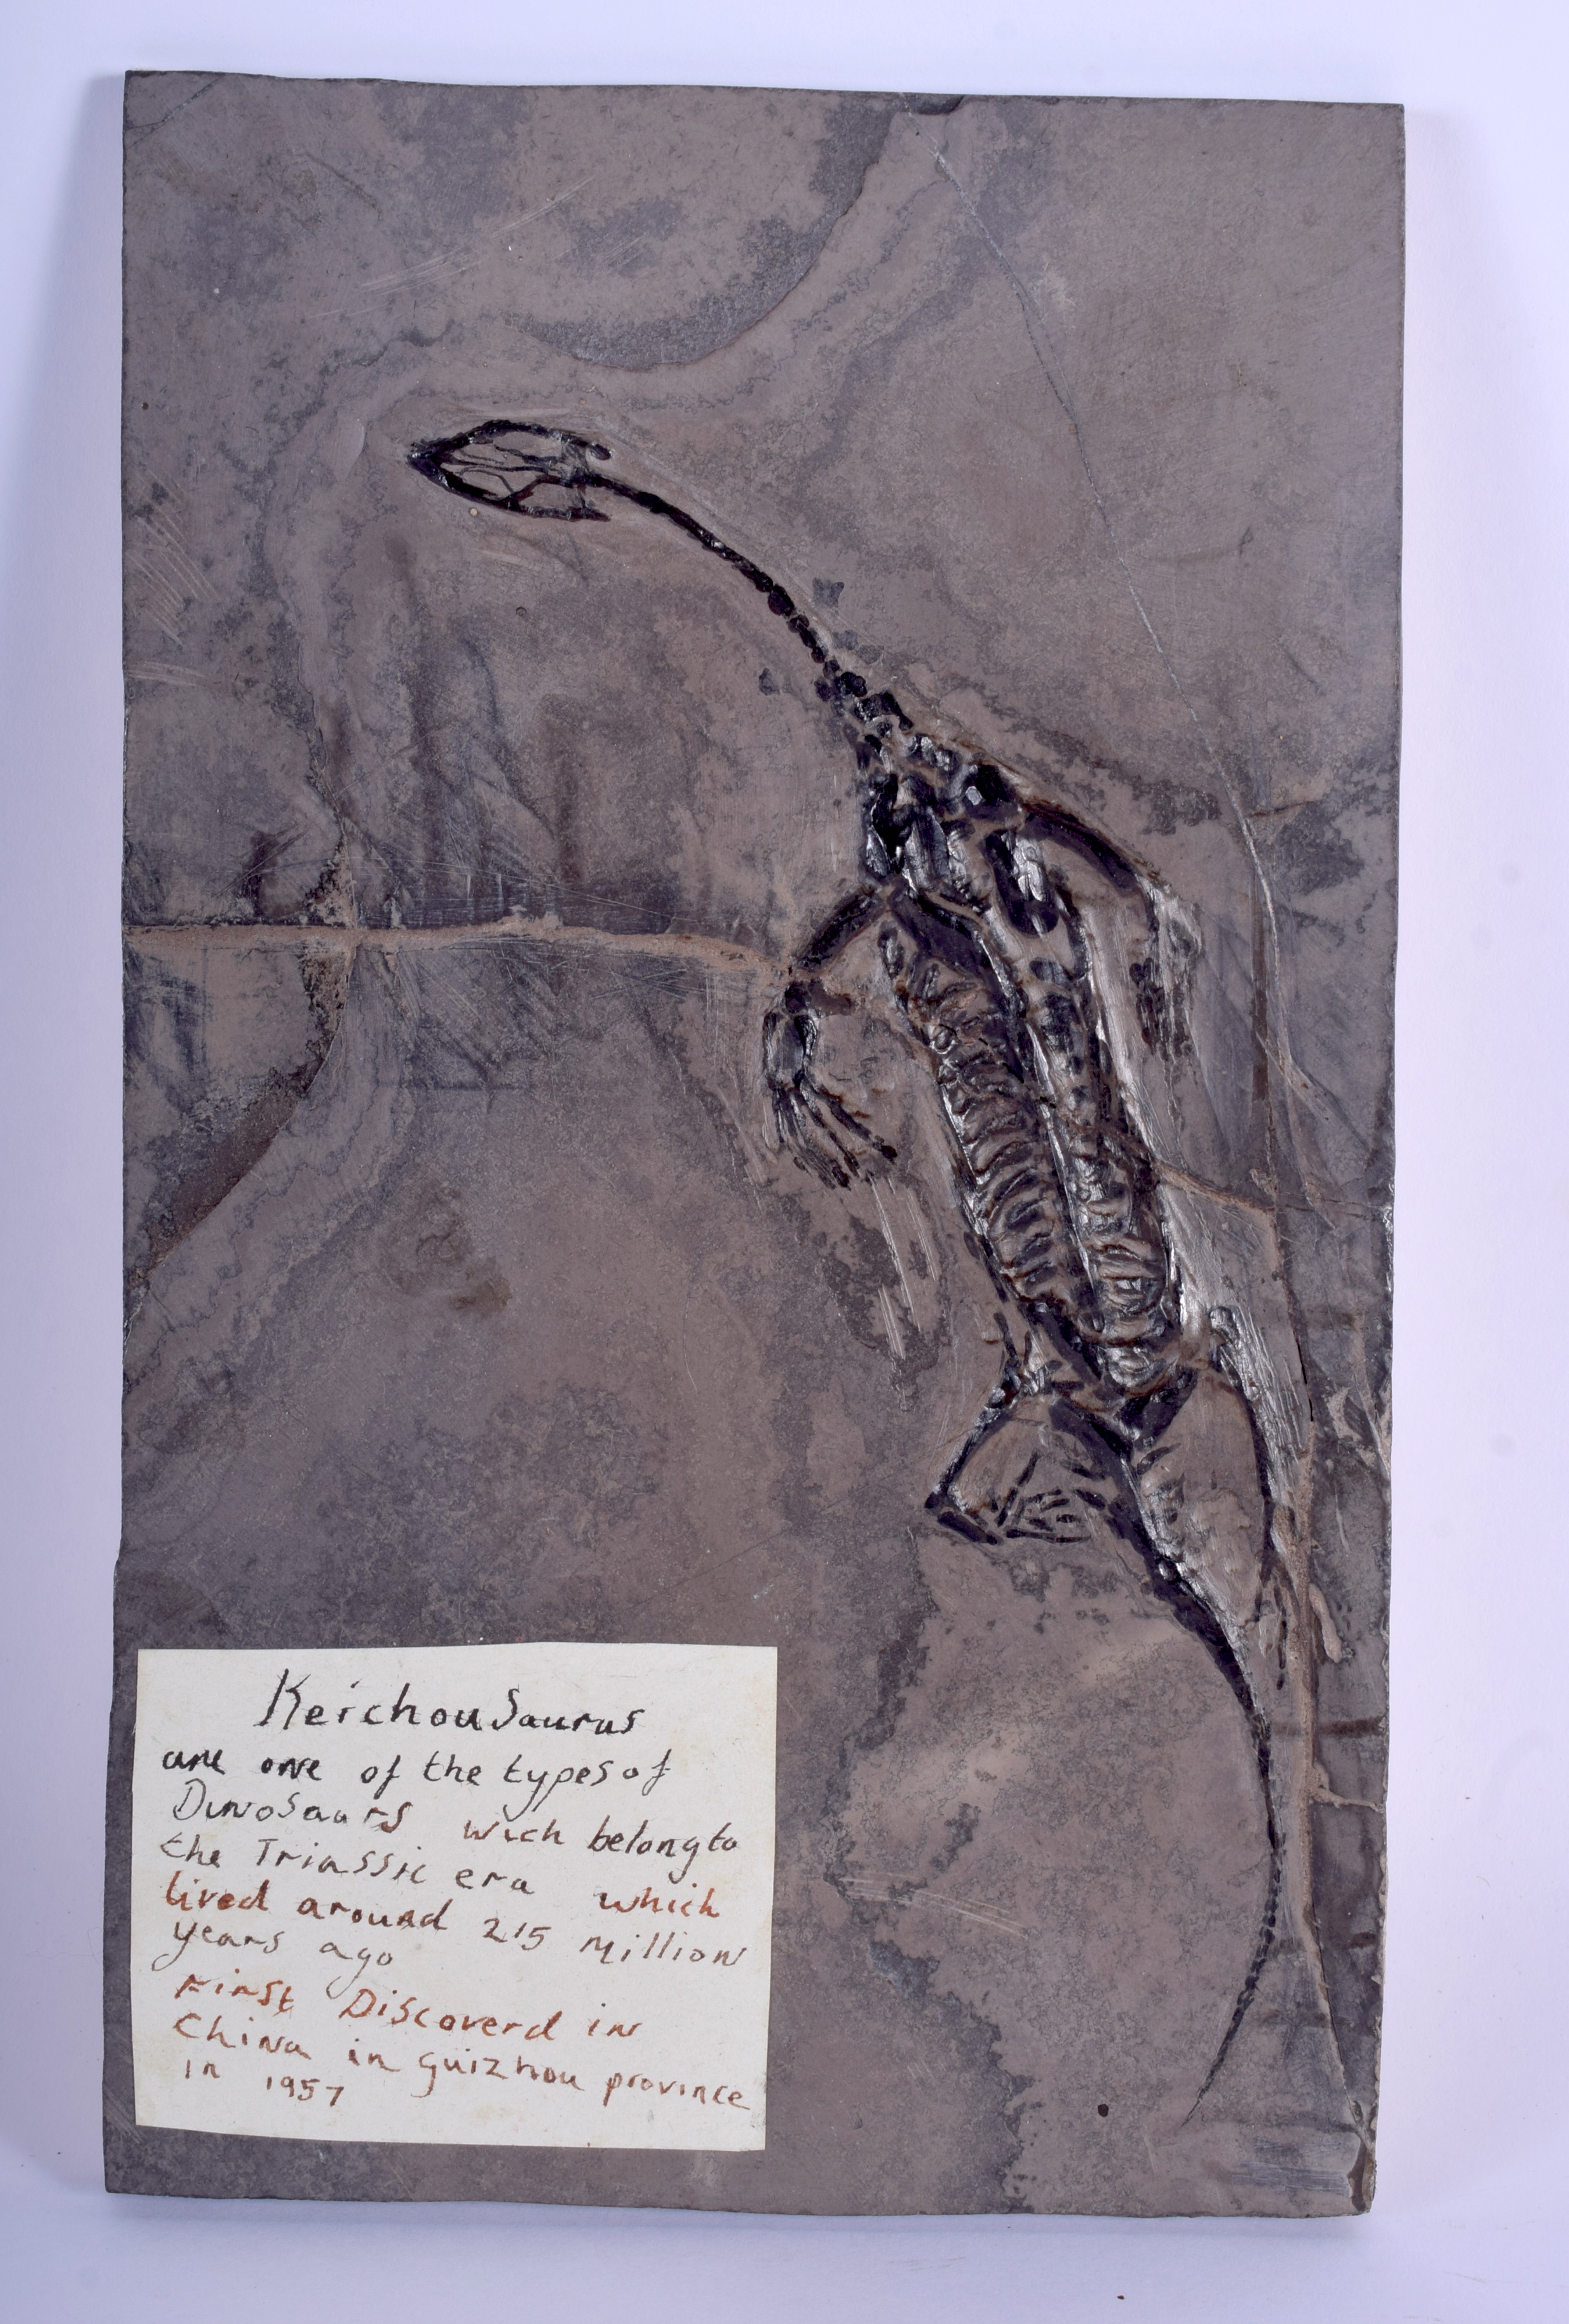 A TRIASSIC ERA DINOSAUR FOSSIL by repute discovered in China C1957. 13 cm x 21 cm.